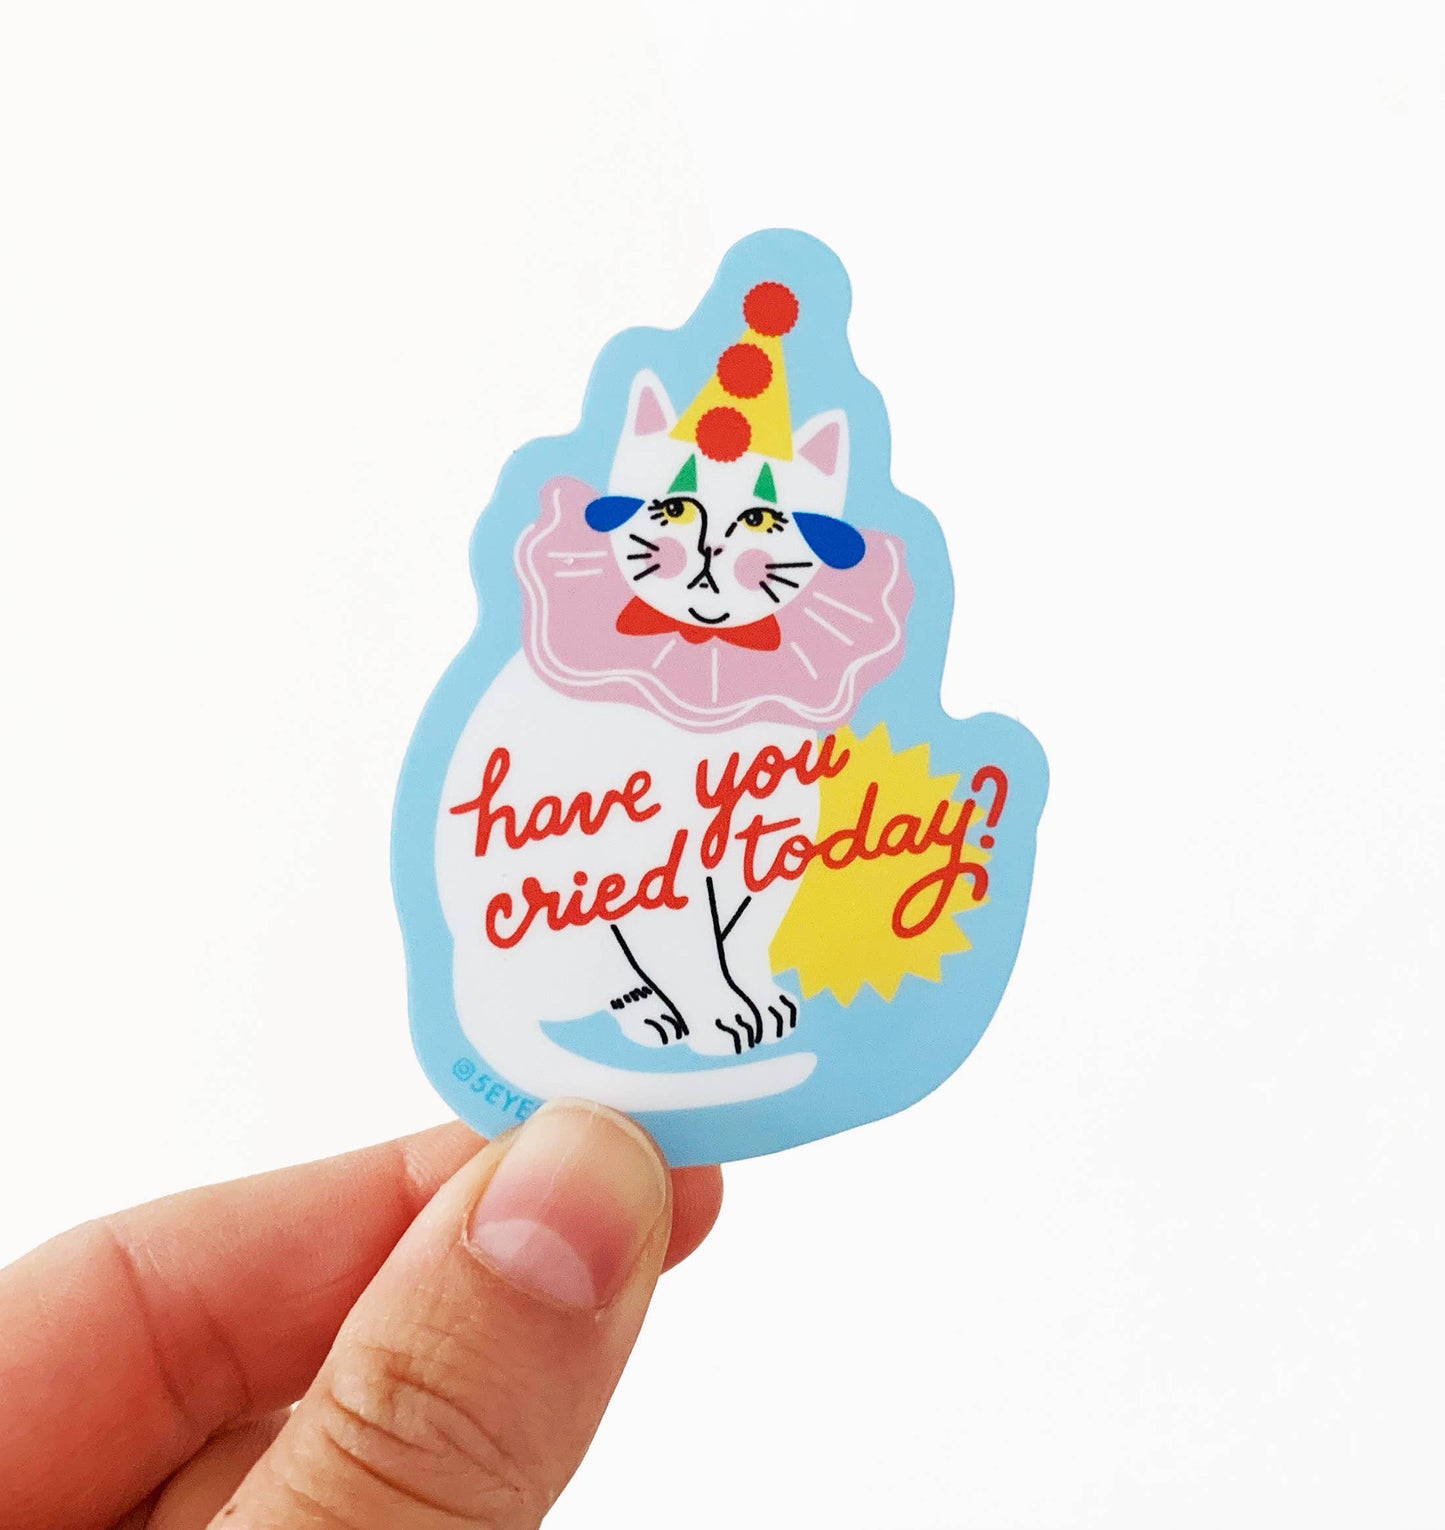 Have You Cried Today? Crying Clown Cat Vinyl Diecut Sticker | 5 Eye Studio